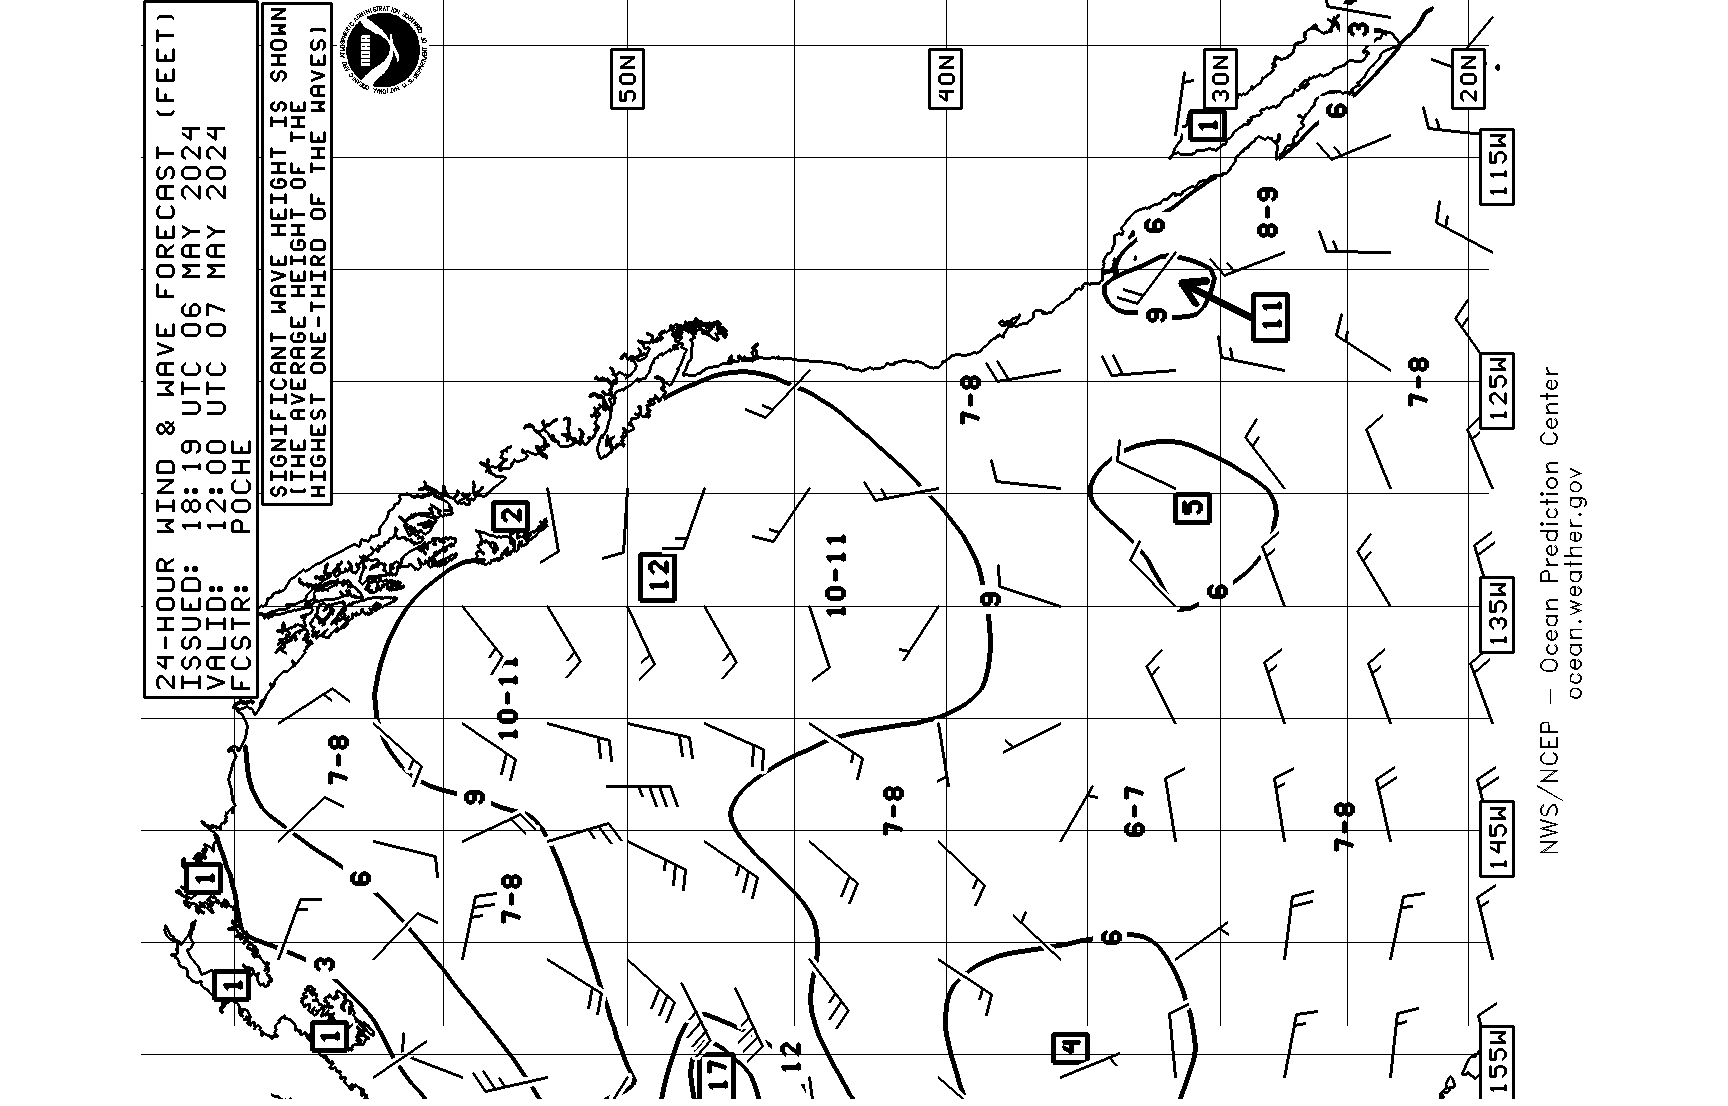 24 hour Pacific wind/wave offshore & adjacent waters